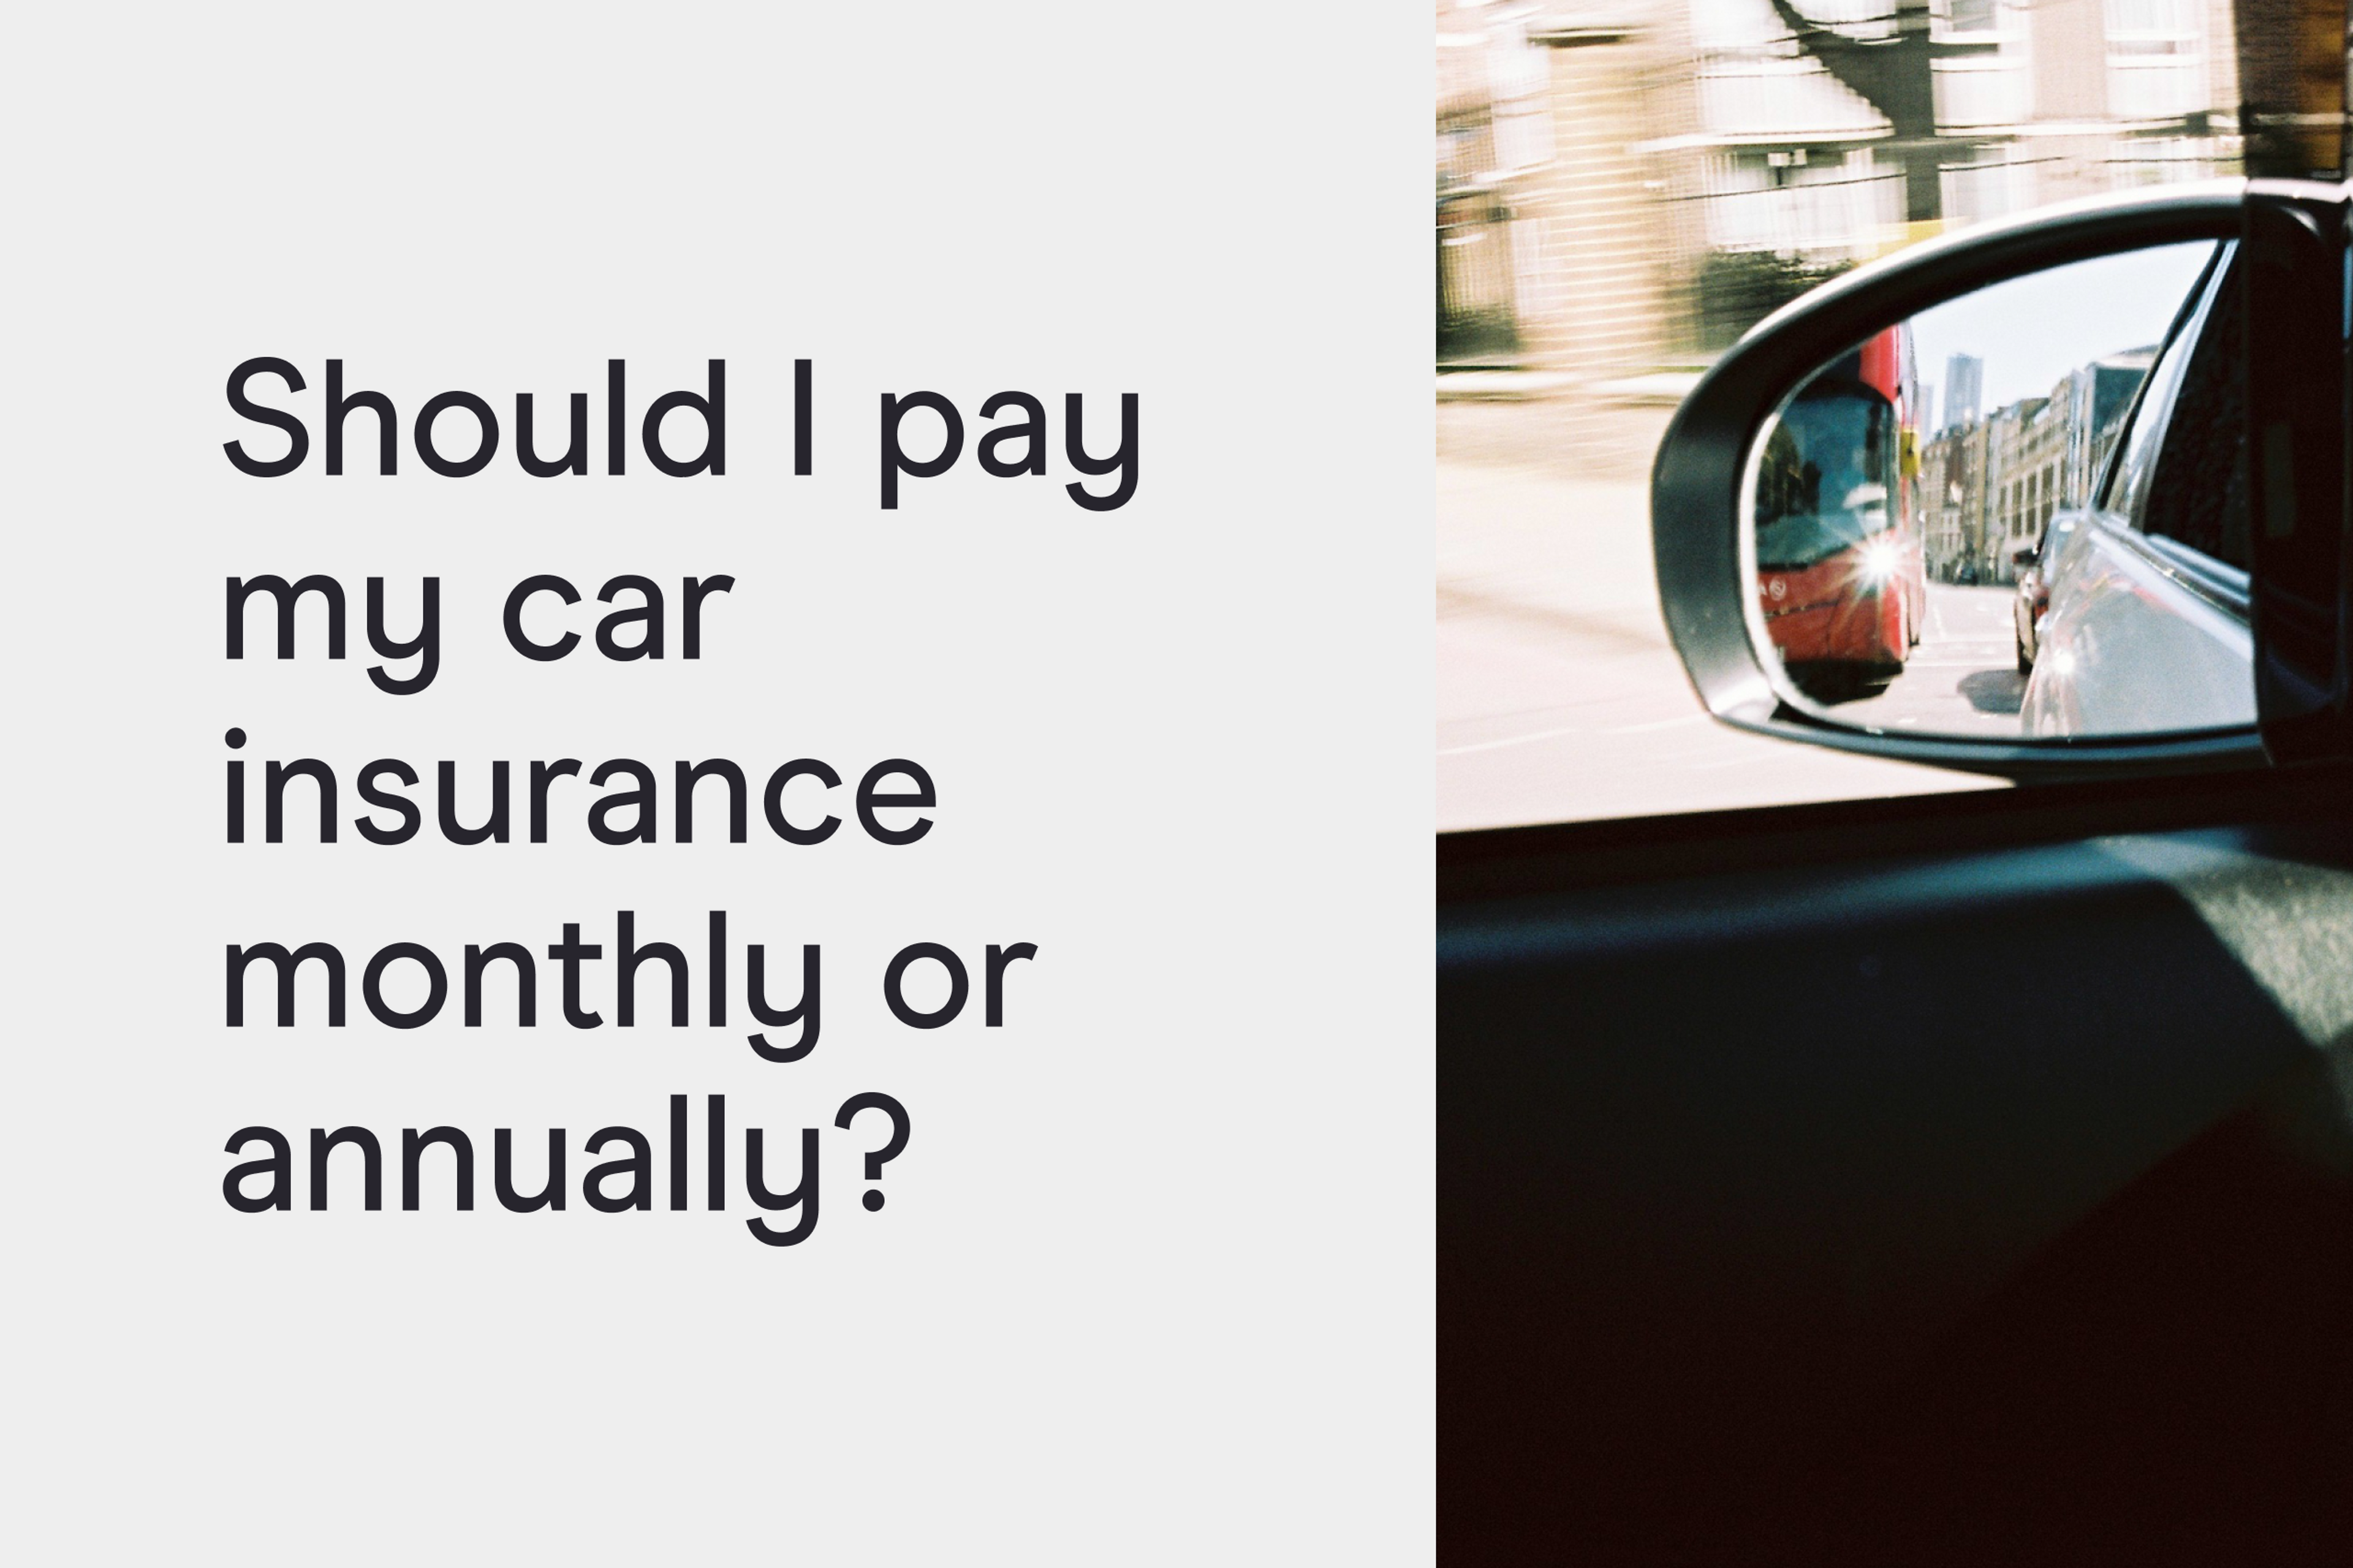 Should I pay my car insurance monthly or annually?